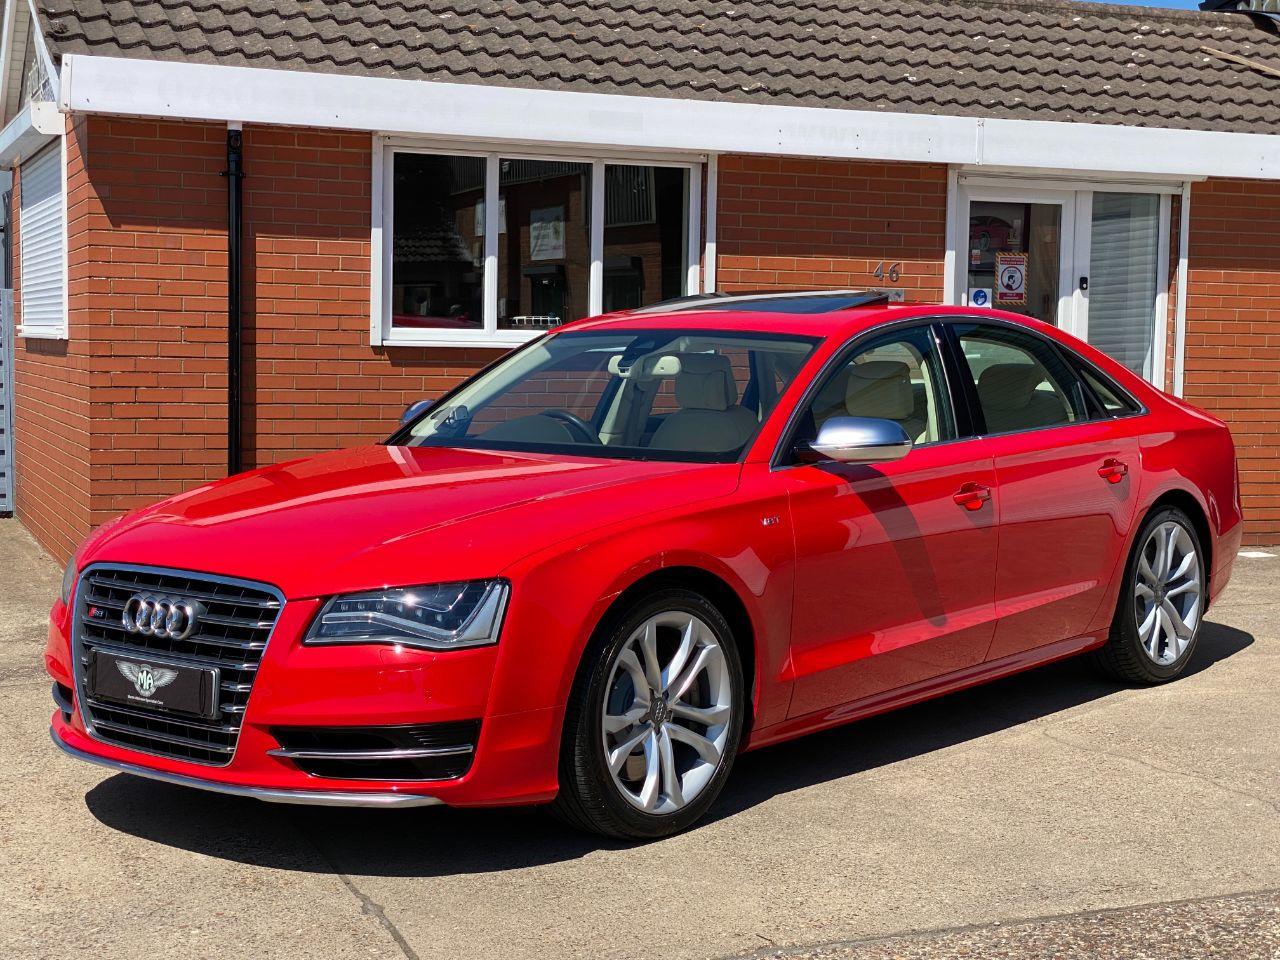 Audi A8 S8 4.0 V8 TFSi Quattro 4dr Tip Auto Saloon Petrol Audi Exclusive Misano Red